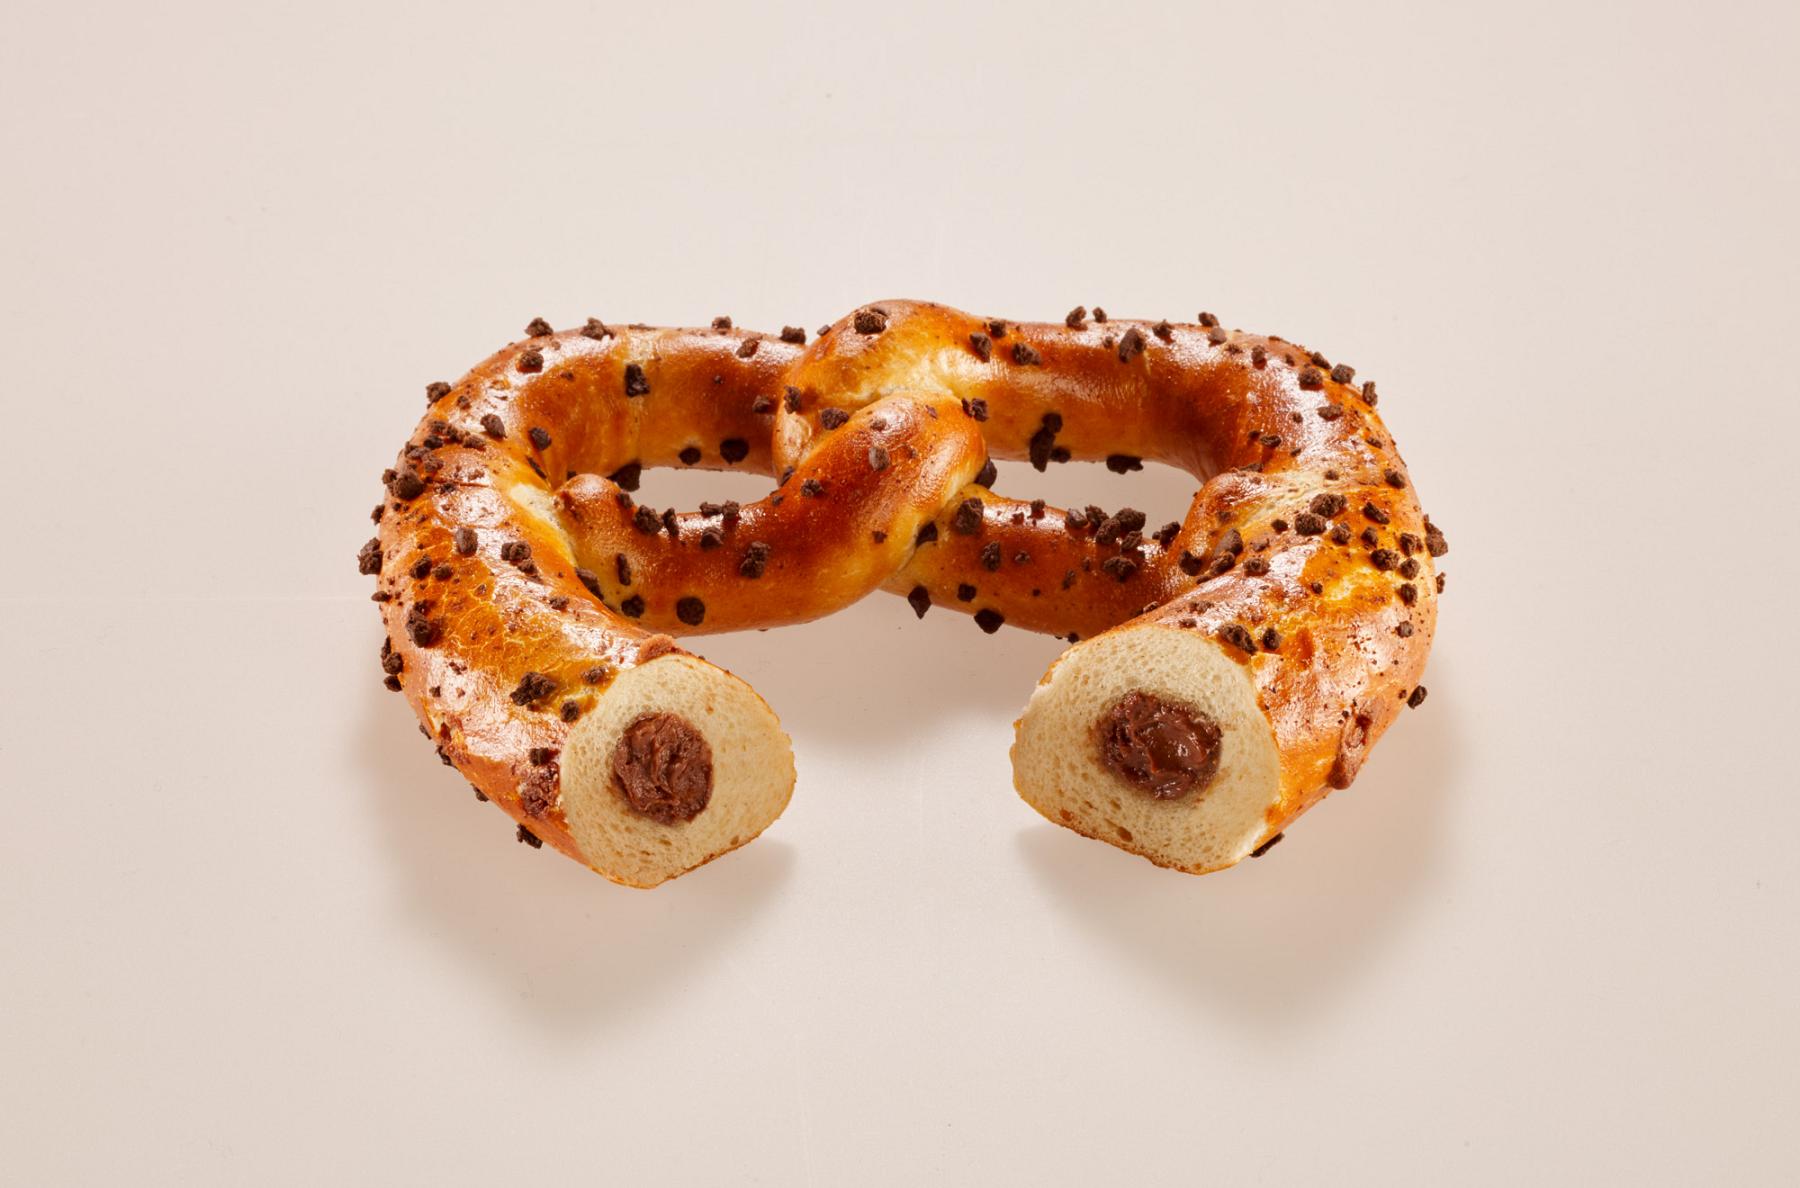 Pretzel filled with chocolate creal, 81 g